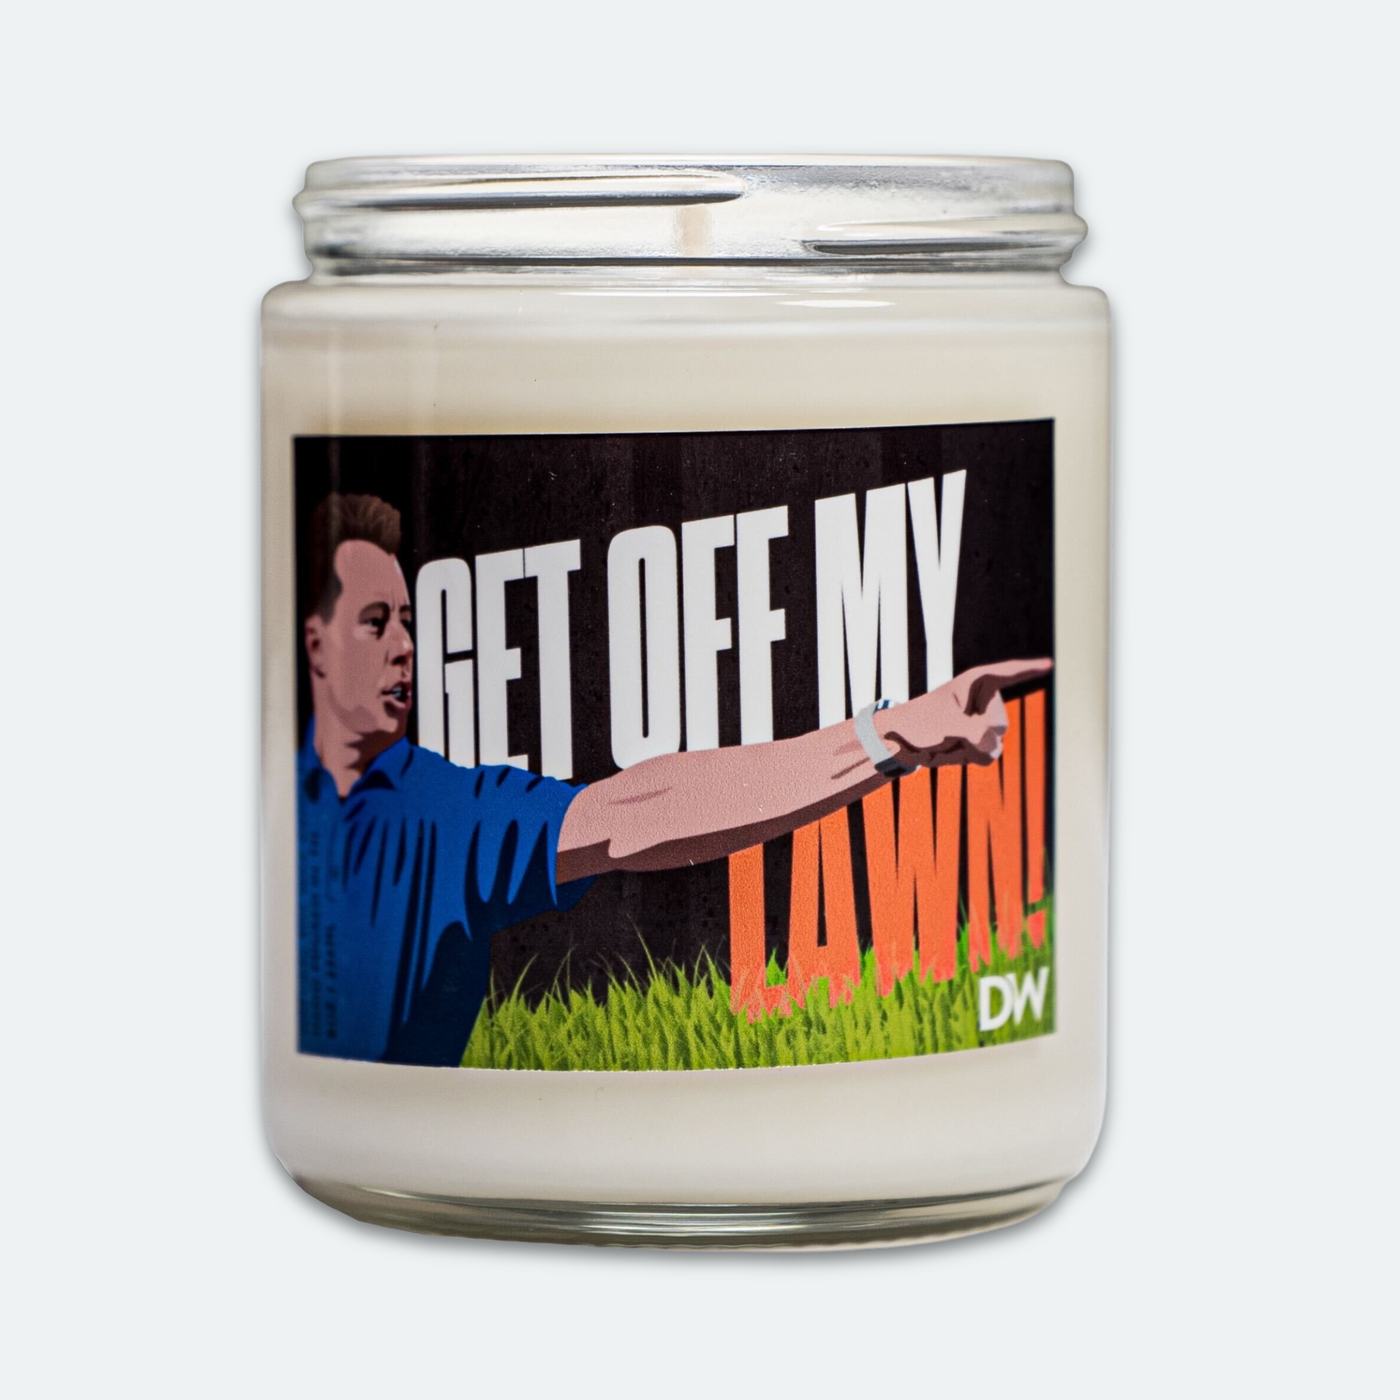 Get Off My Lawn Candle